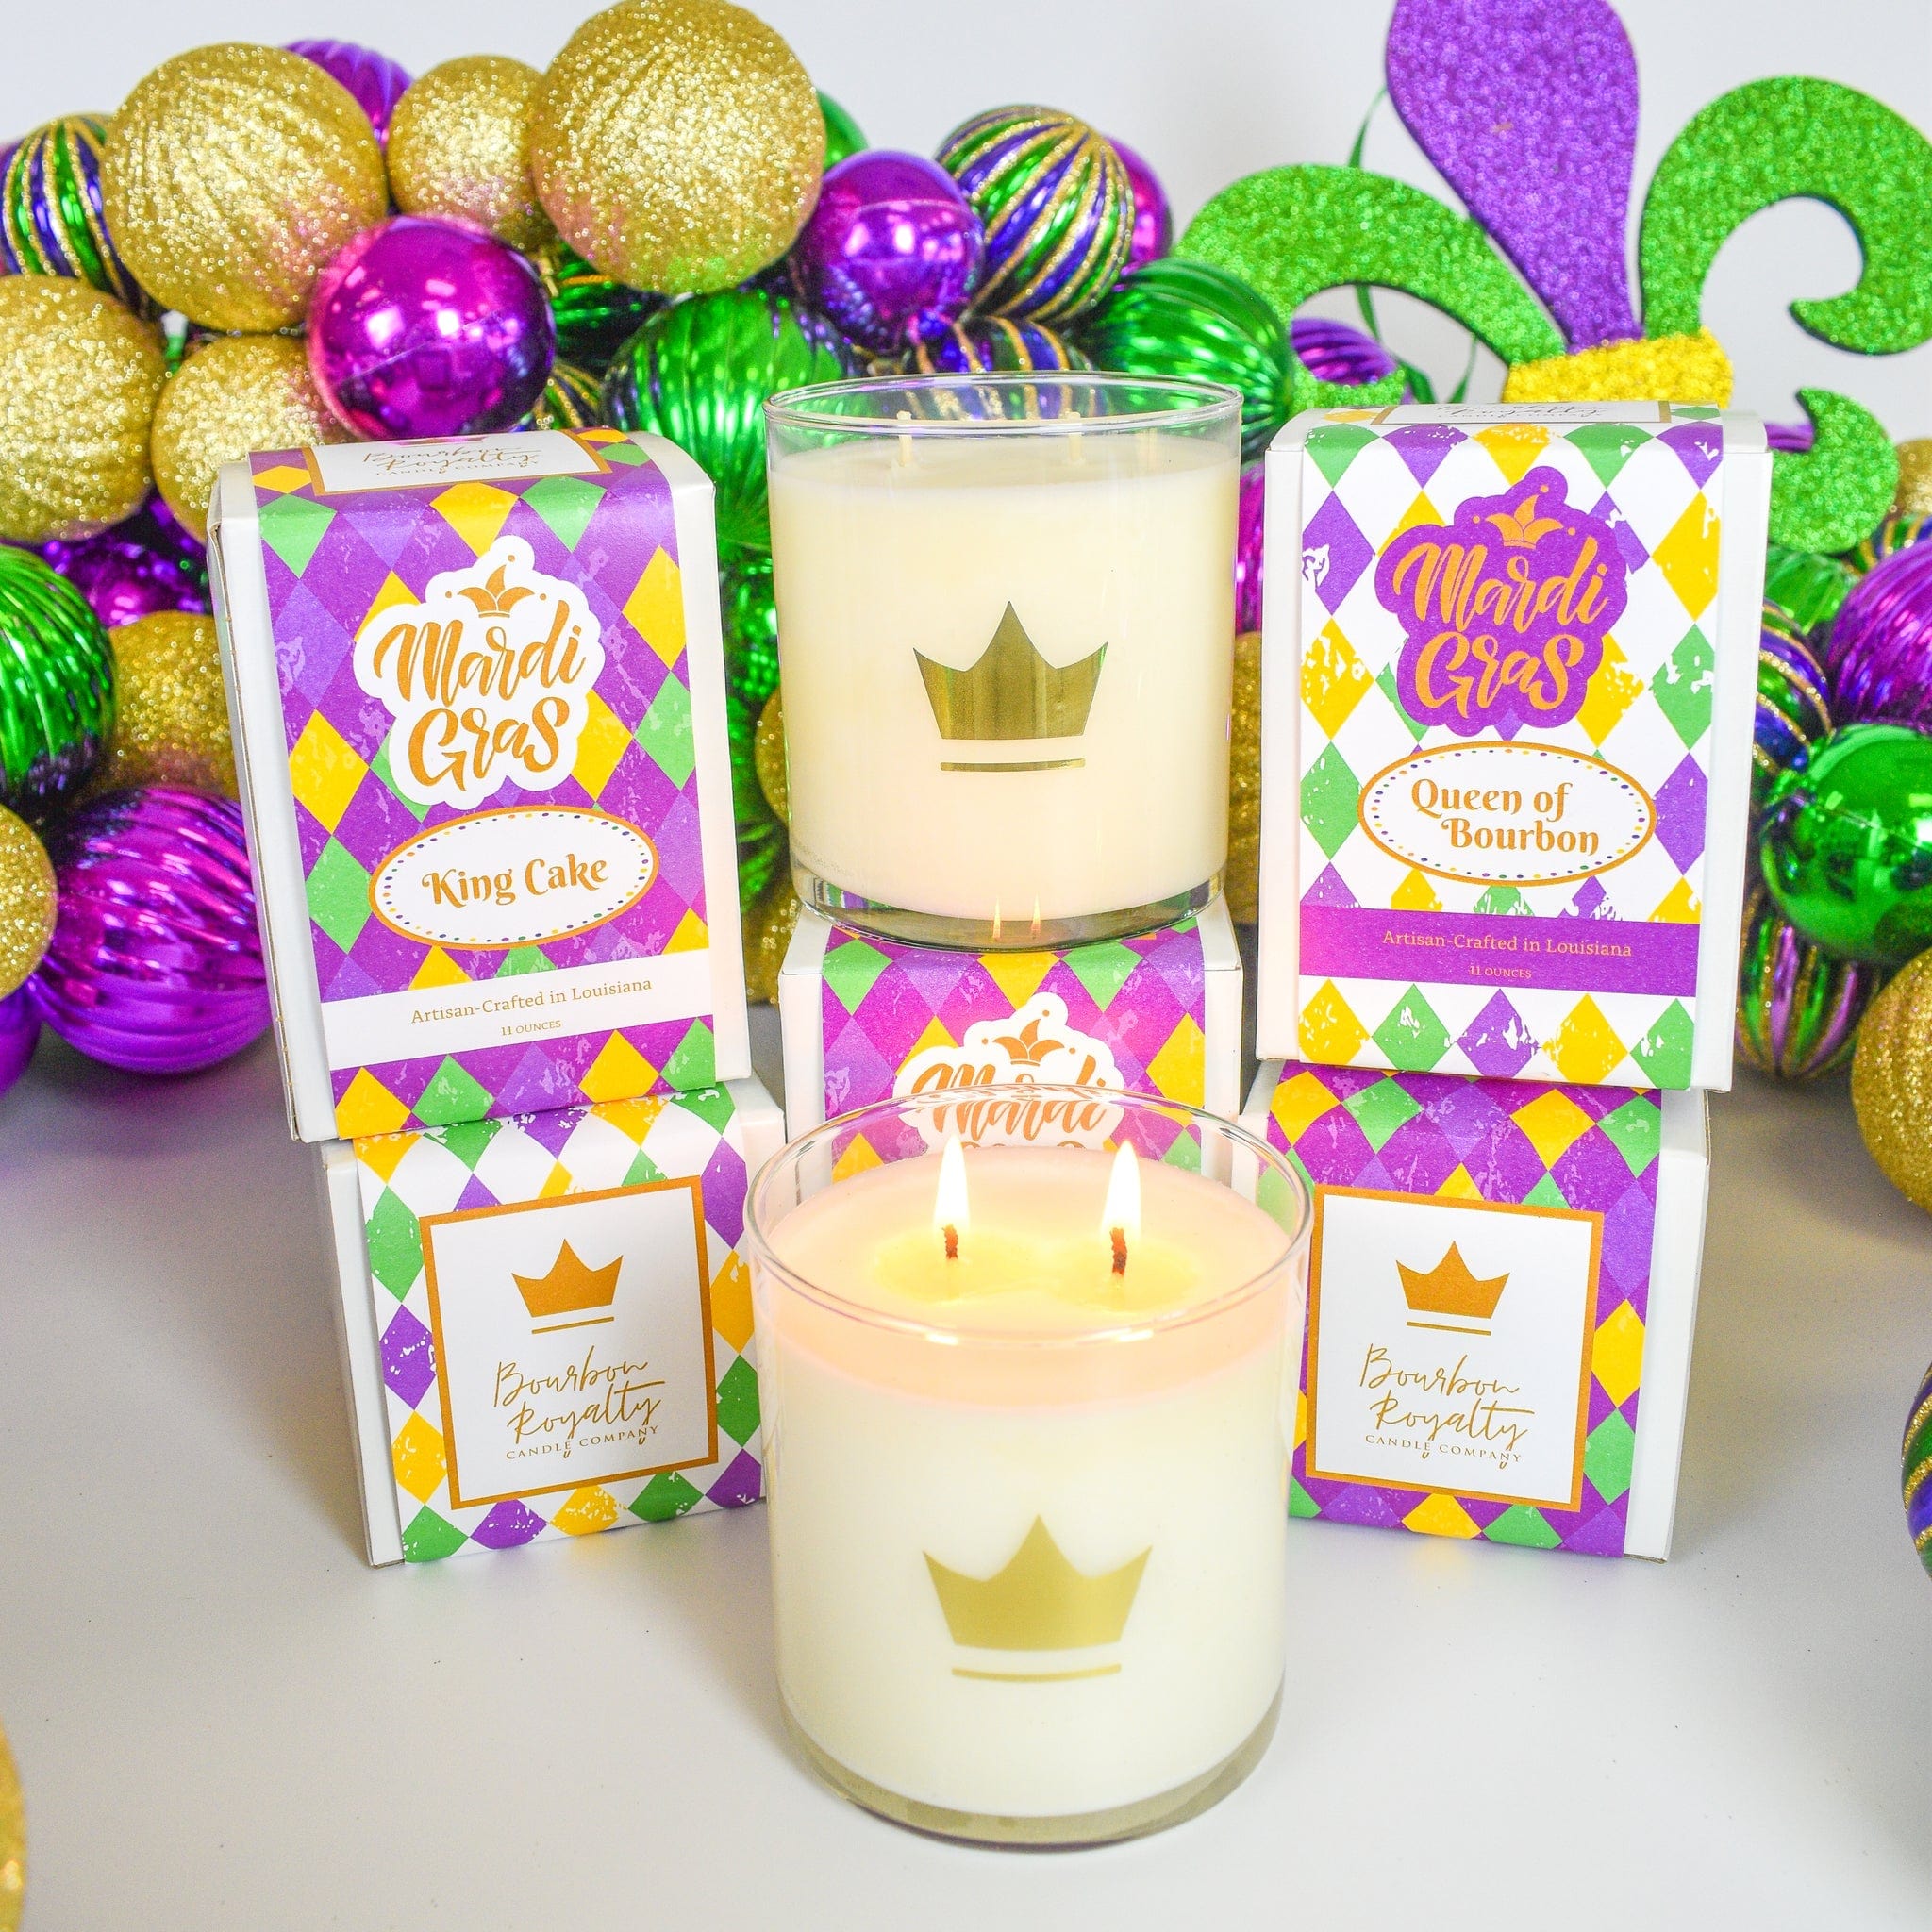 Bourbon Royalty Candle Co Bourbon Royalty Candle Co King Cake Mardi Gras Candle - Little Miss Muffin Children & Home